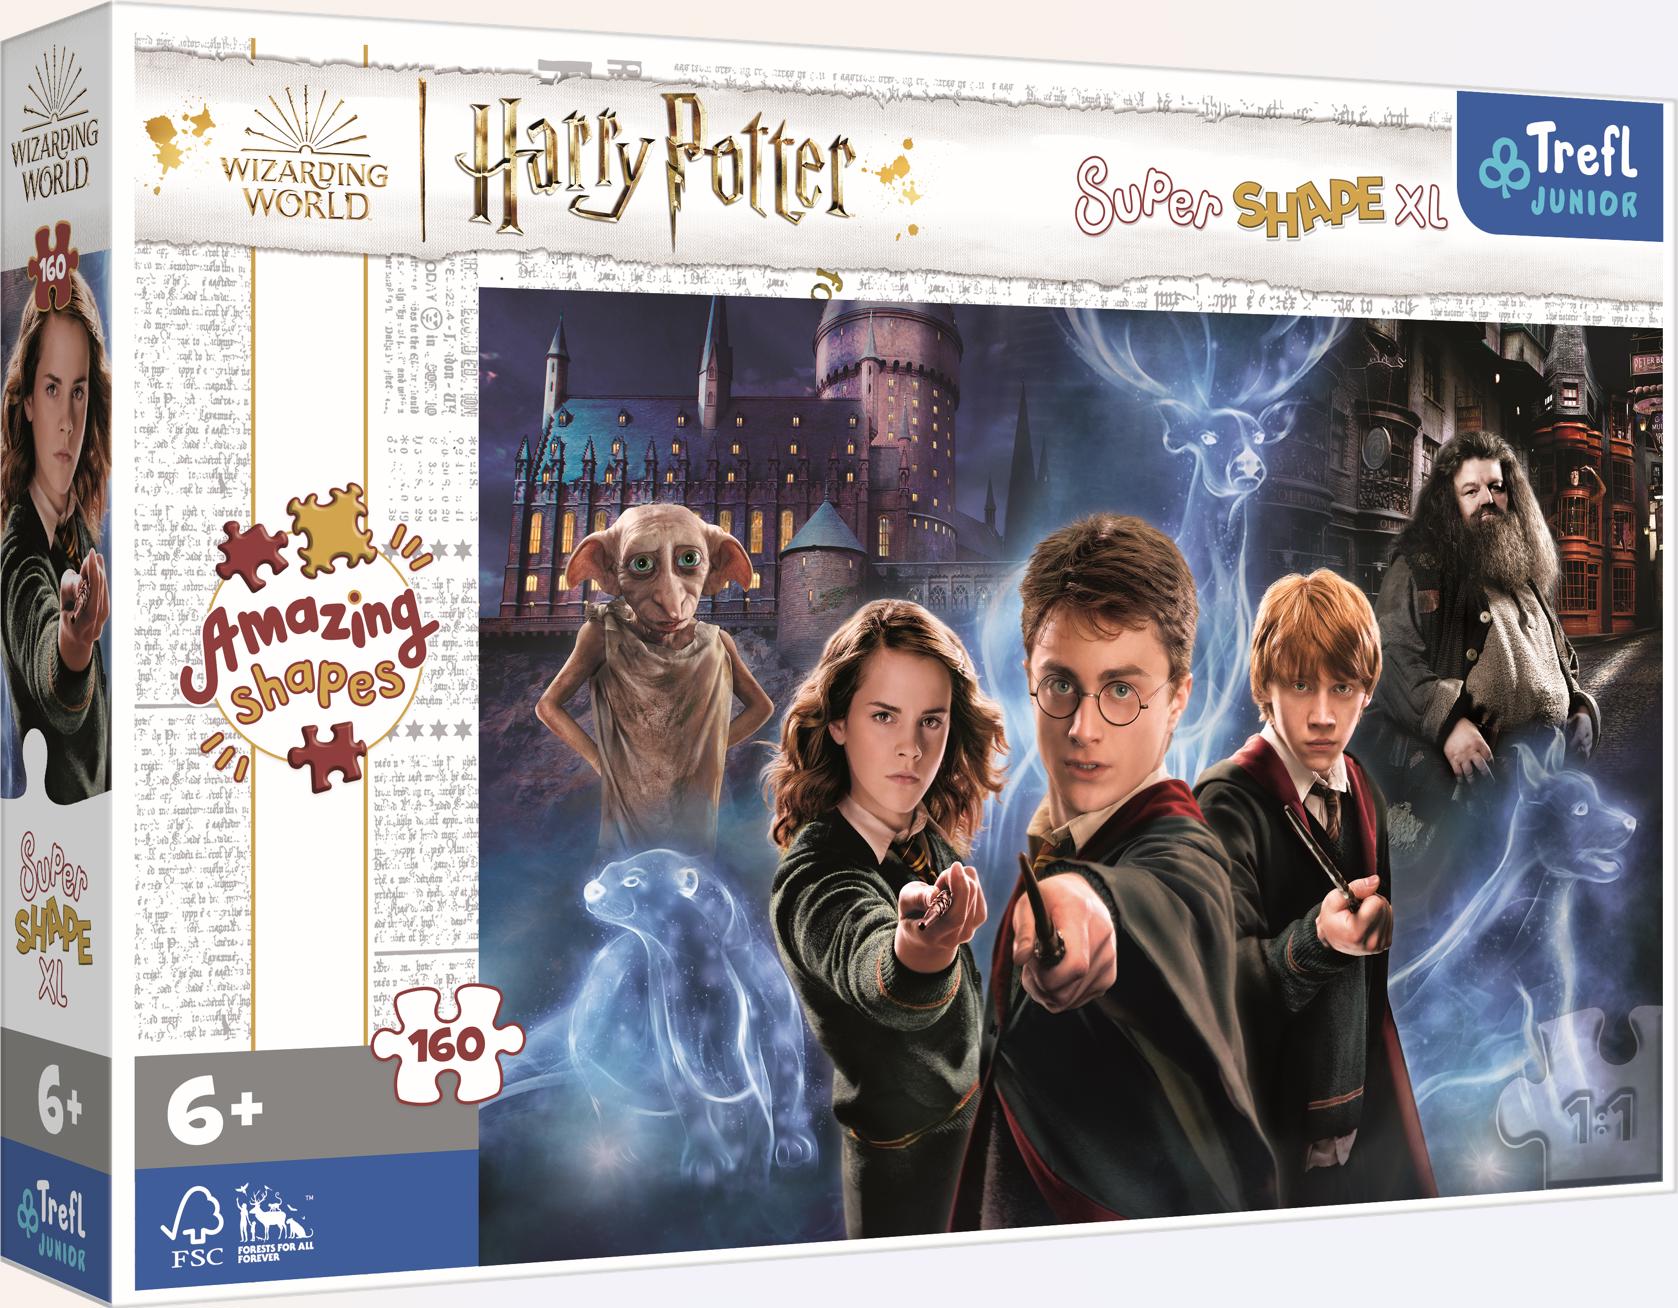 Puzzle The magic world of Harry Potter, 160 pieces